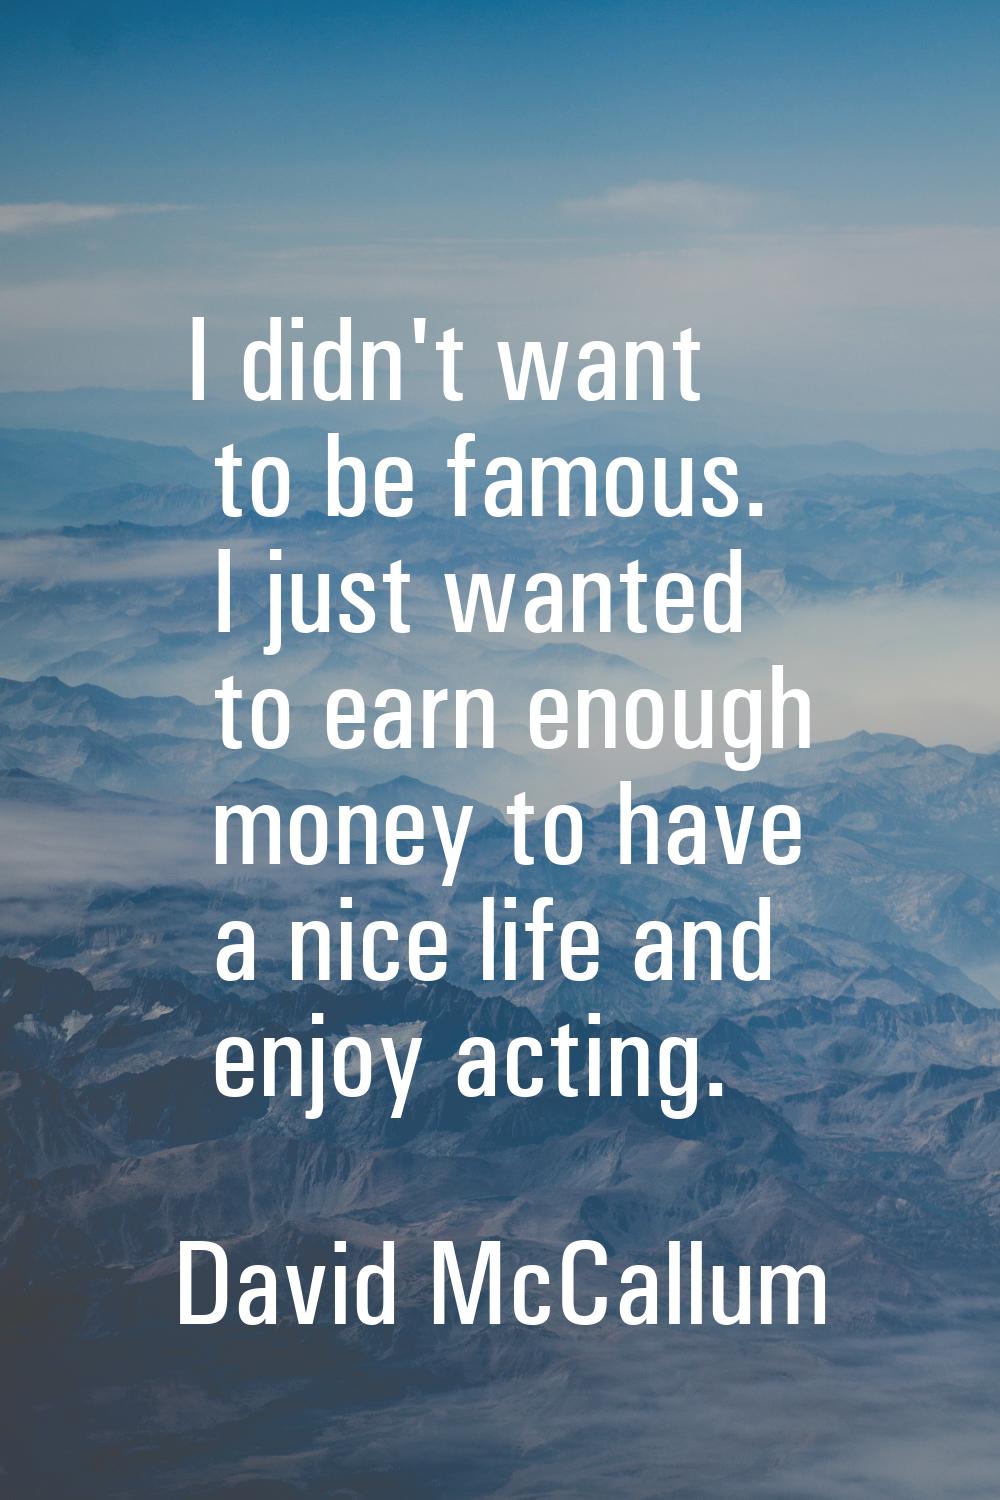 I didn't want to be famous. I just wanted to earn enough money to have a nice life and enjoy acting